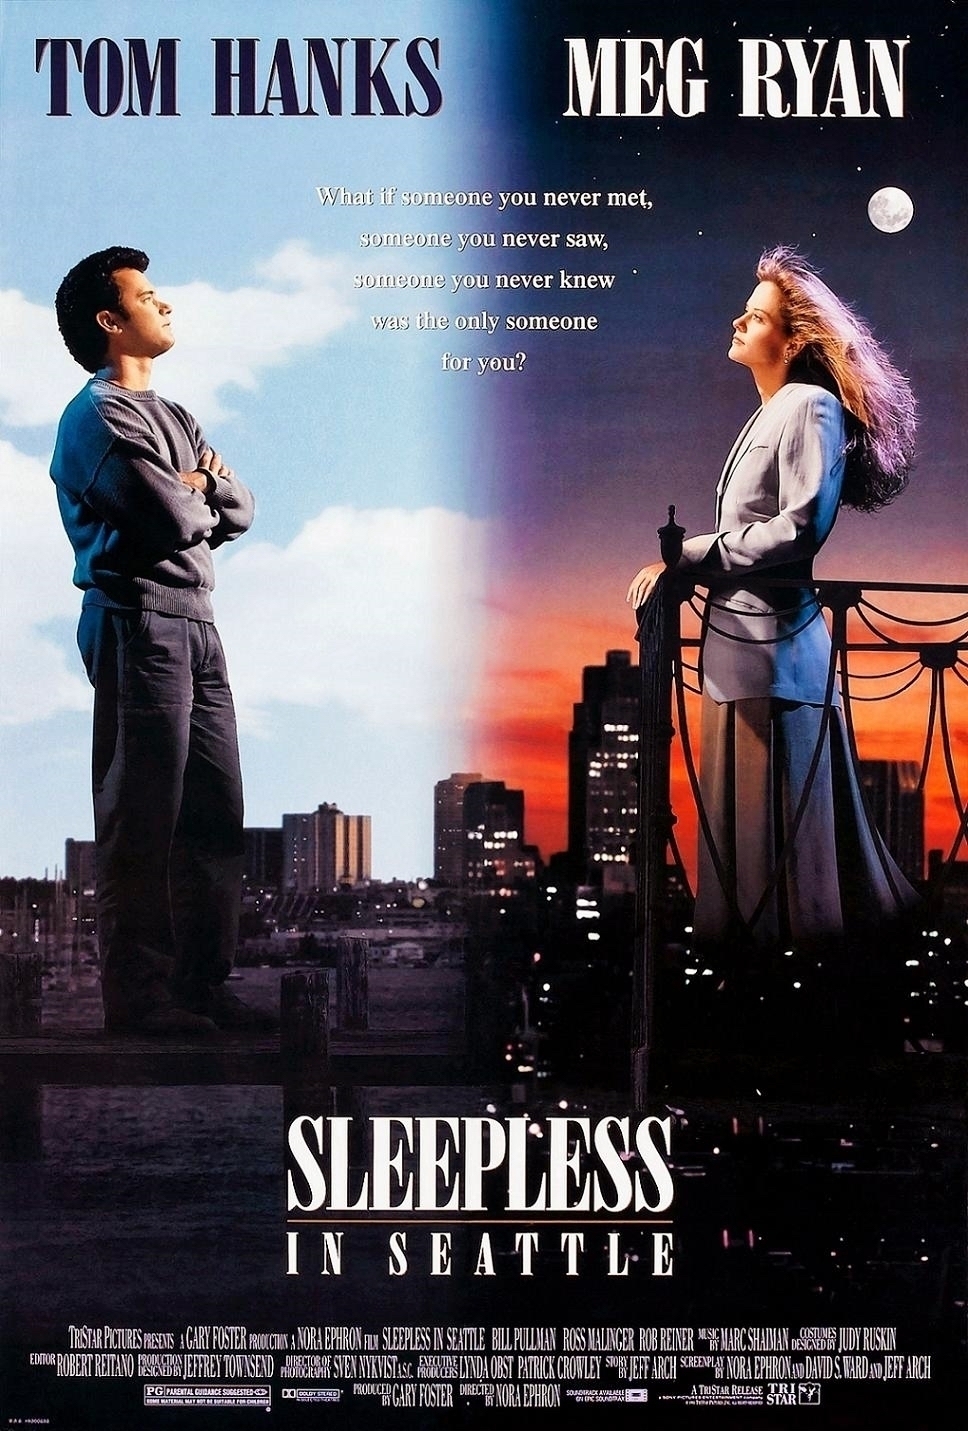 Movie poster for Sleepless in Seattle (1993): A man and a woman stand apart against a backdrop of day and night city landscapes, symbolizing emotional distance. The text reads: 'TOM HANKS MEG RYAN. What if someone you never met, someone you never saw, someone you never knew was the only someone for you? SLEEPLESS IN SEATTLE. TRI-STAR PICTURES presents A GARY FOSTER production. A NORA EPHRON FILM. No SLEEPLESS IN SEATTLE. BILL PULLMAN, ROSS MALINGER, ROB REINER. Music by MARC SHAIMAN. Costumes by JUDY RUSKIN. Editor ROBERT REITANO. Production Designer JEFFREY TOWNSEND. Director of Photography SINS ALVIN. Executive Producers LYDIA DEAN PILCHER, PATRICK CROWLEY. Written by NORA EPHRON & DAVID S. WARD & JEFF ARCH. Produced by GARY FOSTER. Directed by NORA EPHRON. A TRISTAR RELEASE. DOLBY STEREO. IN SELECTED THEATRES. SOUNDTRACK AVAILABLE ON EPIC SOUNDTRAX.'